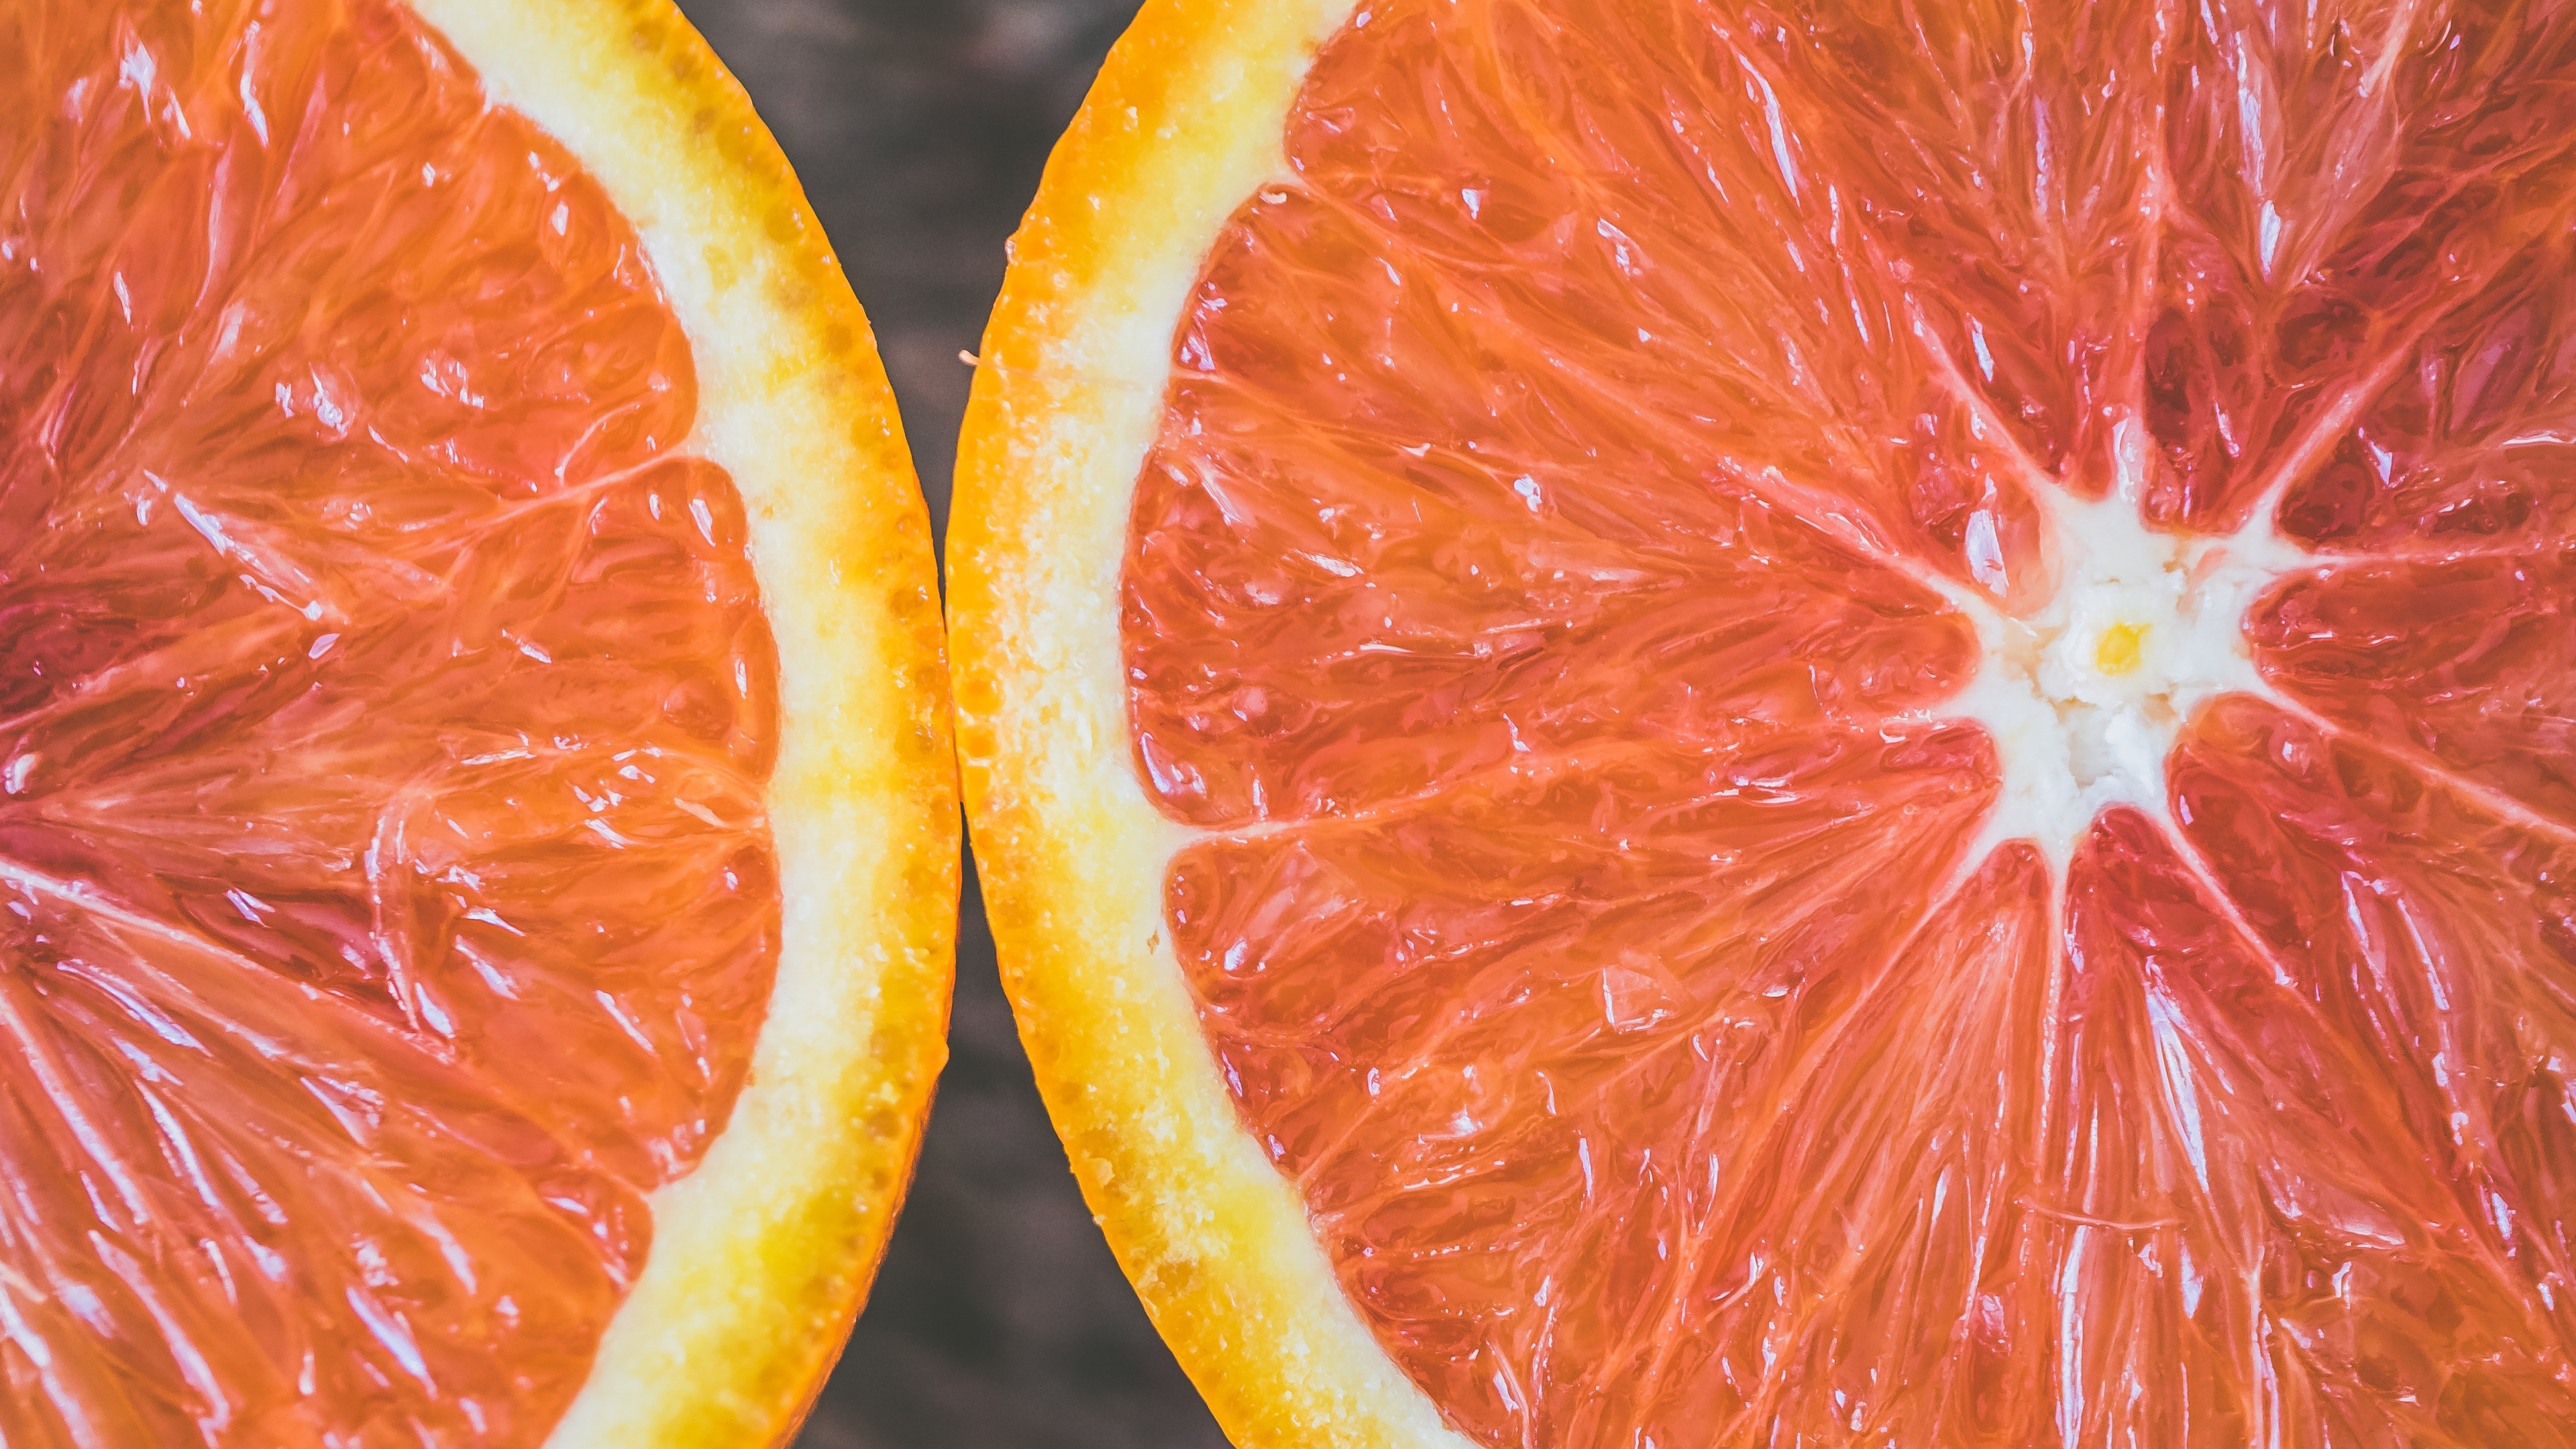 Sliced Orange Fruit in Close up Photography. Wallpaper in 3840x2160 Resolution